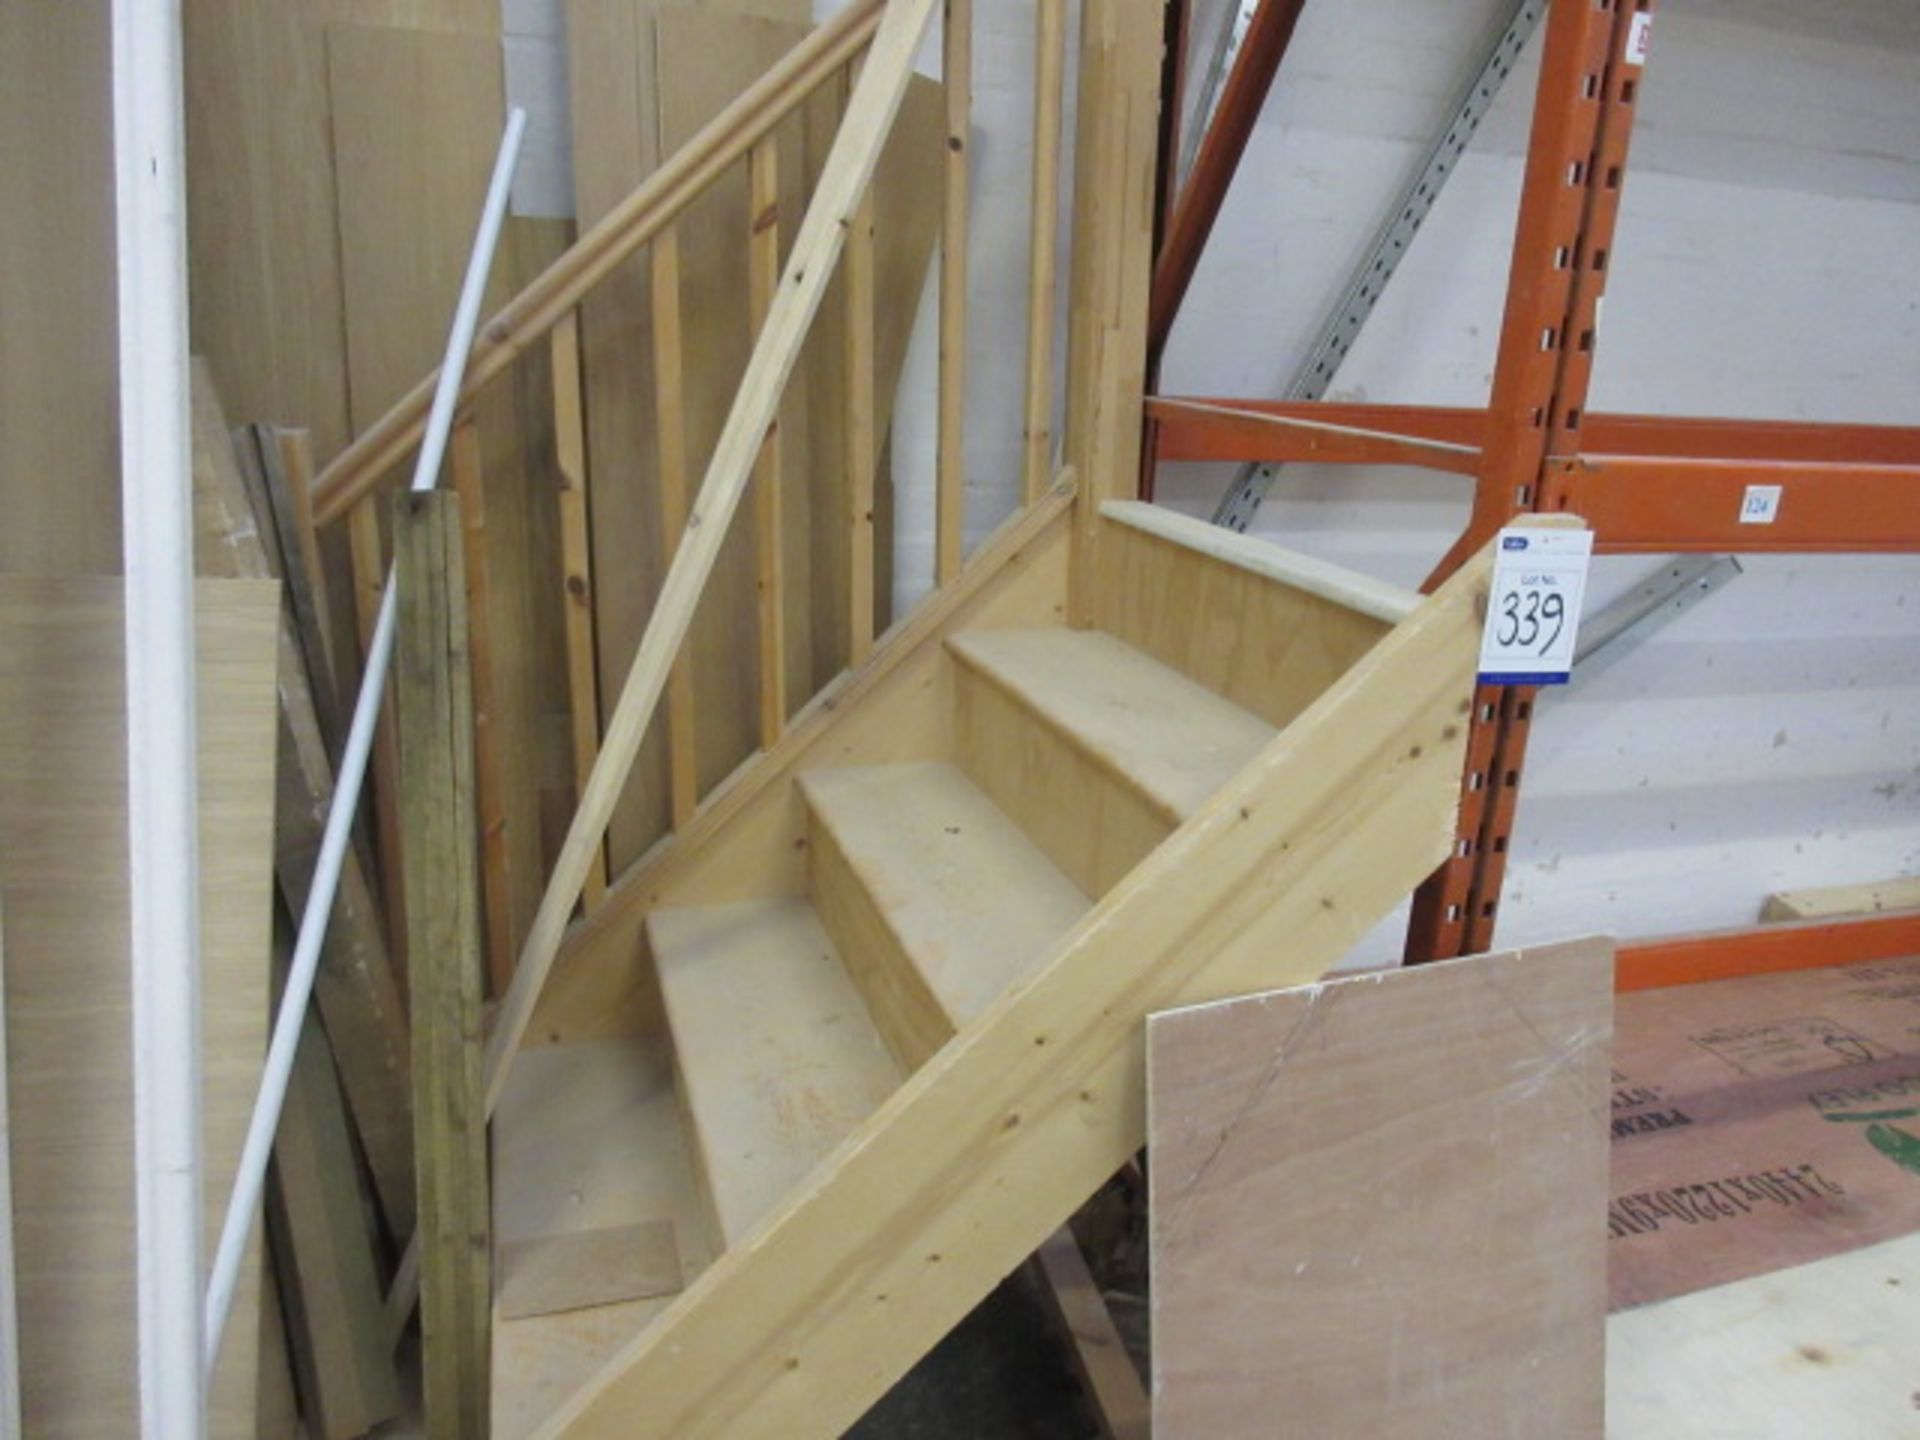 A 5 step timber stair unit